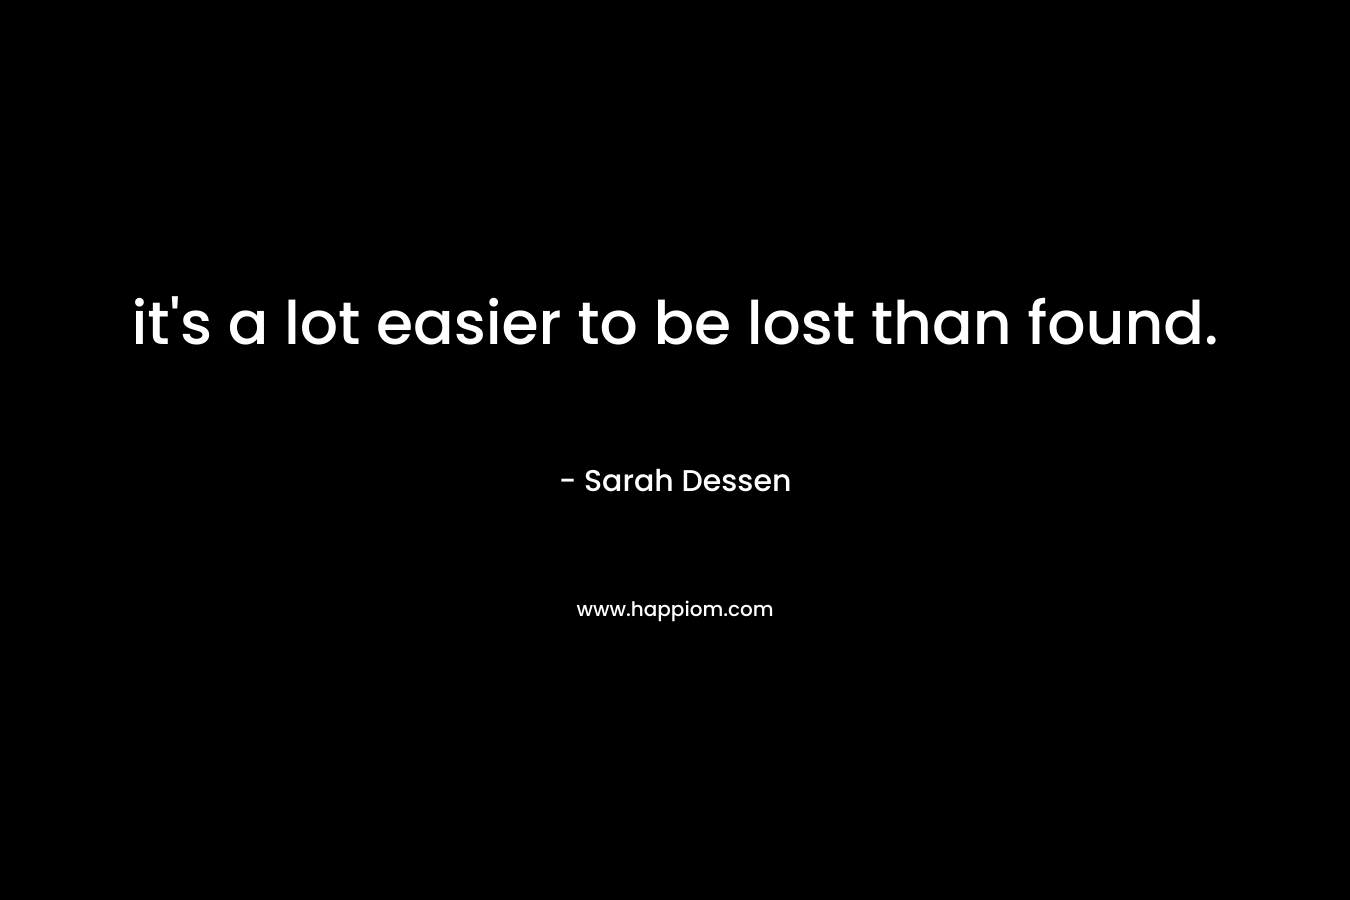 it's a lot easier to be lost than found.